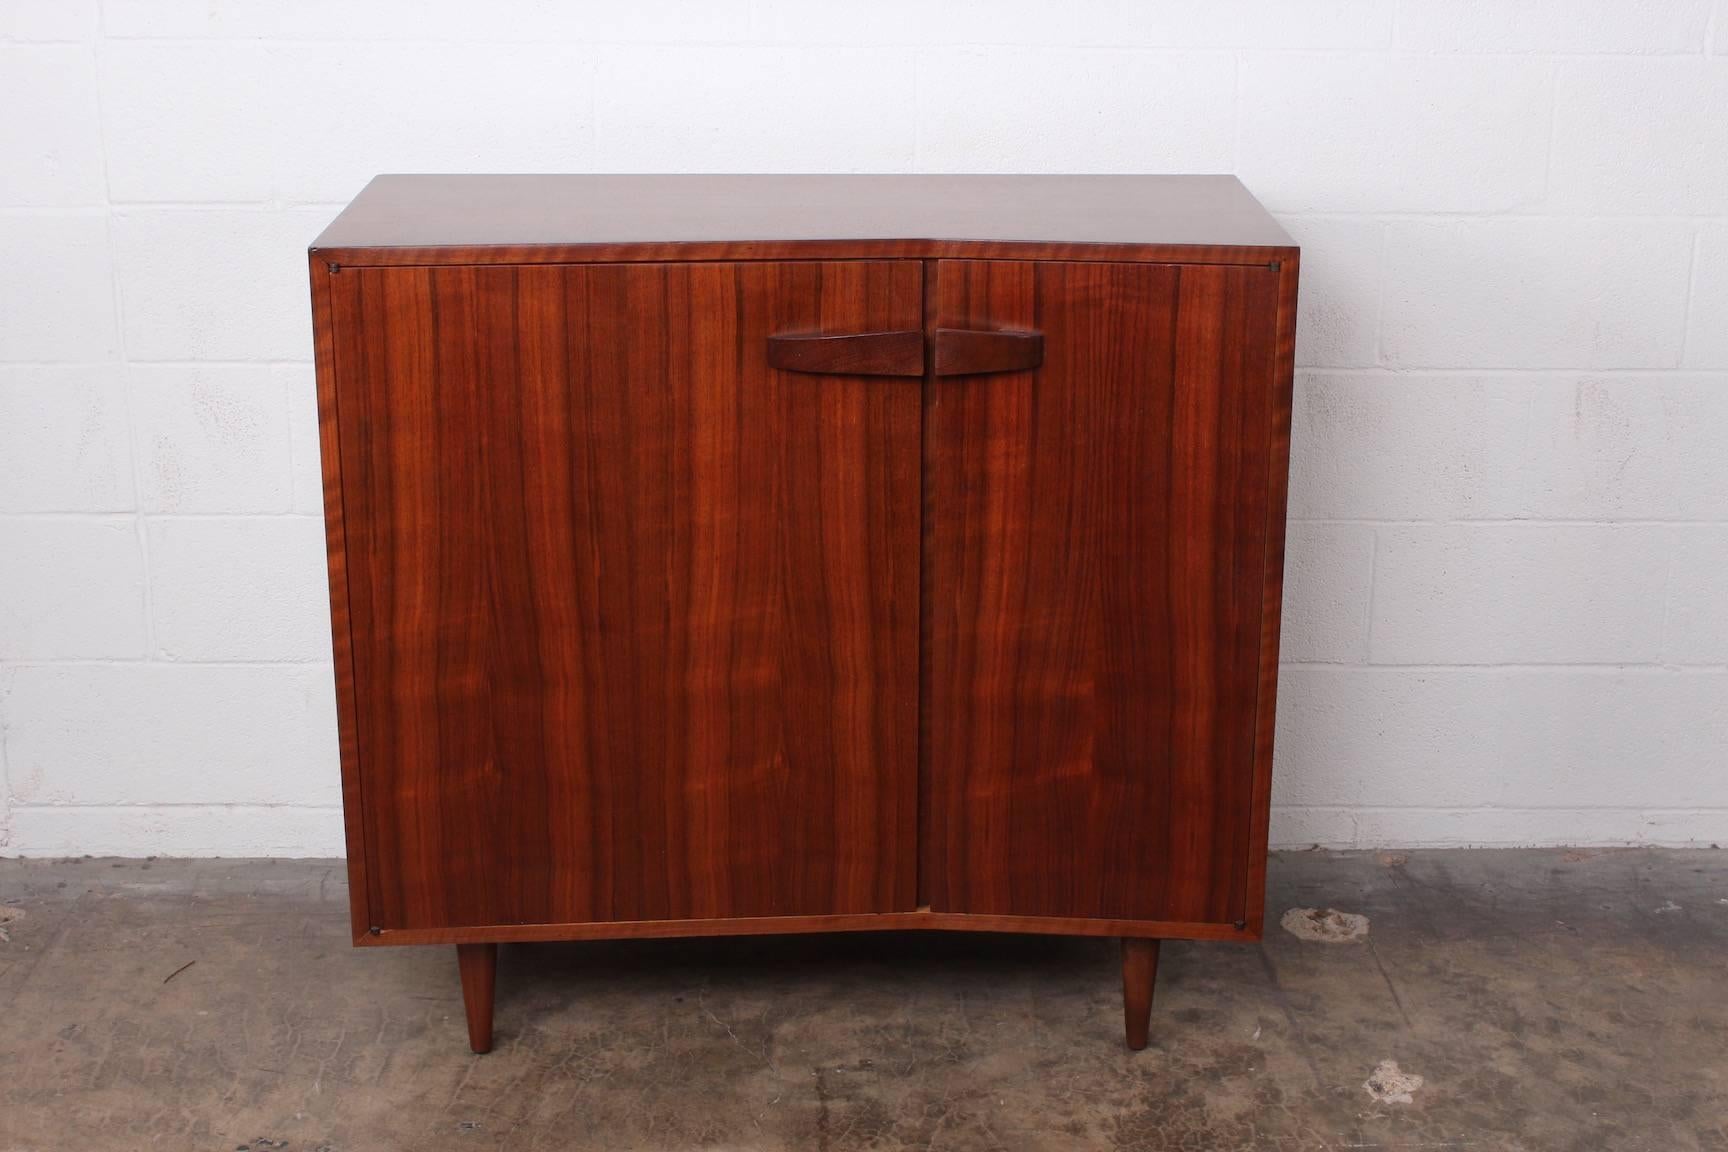 An angular cabinet designed by Bertha Schaefer for Singer and Sons.